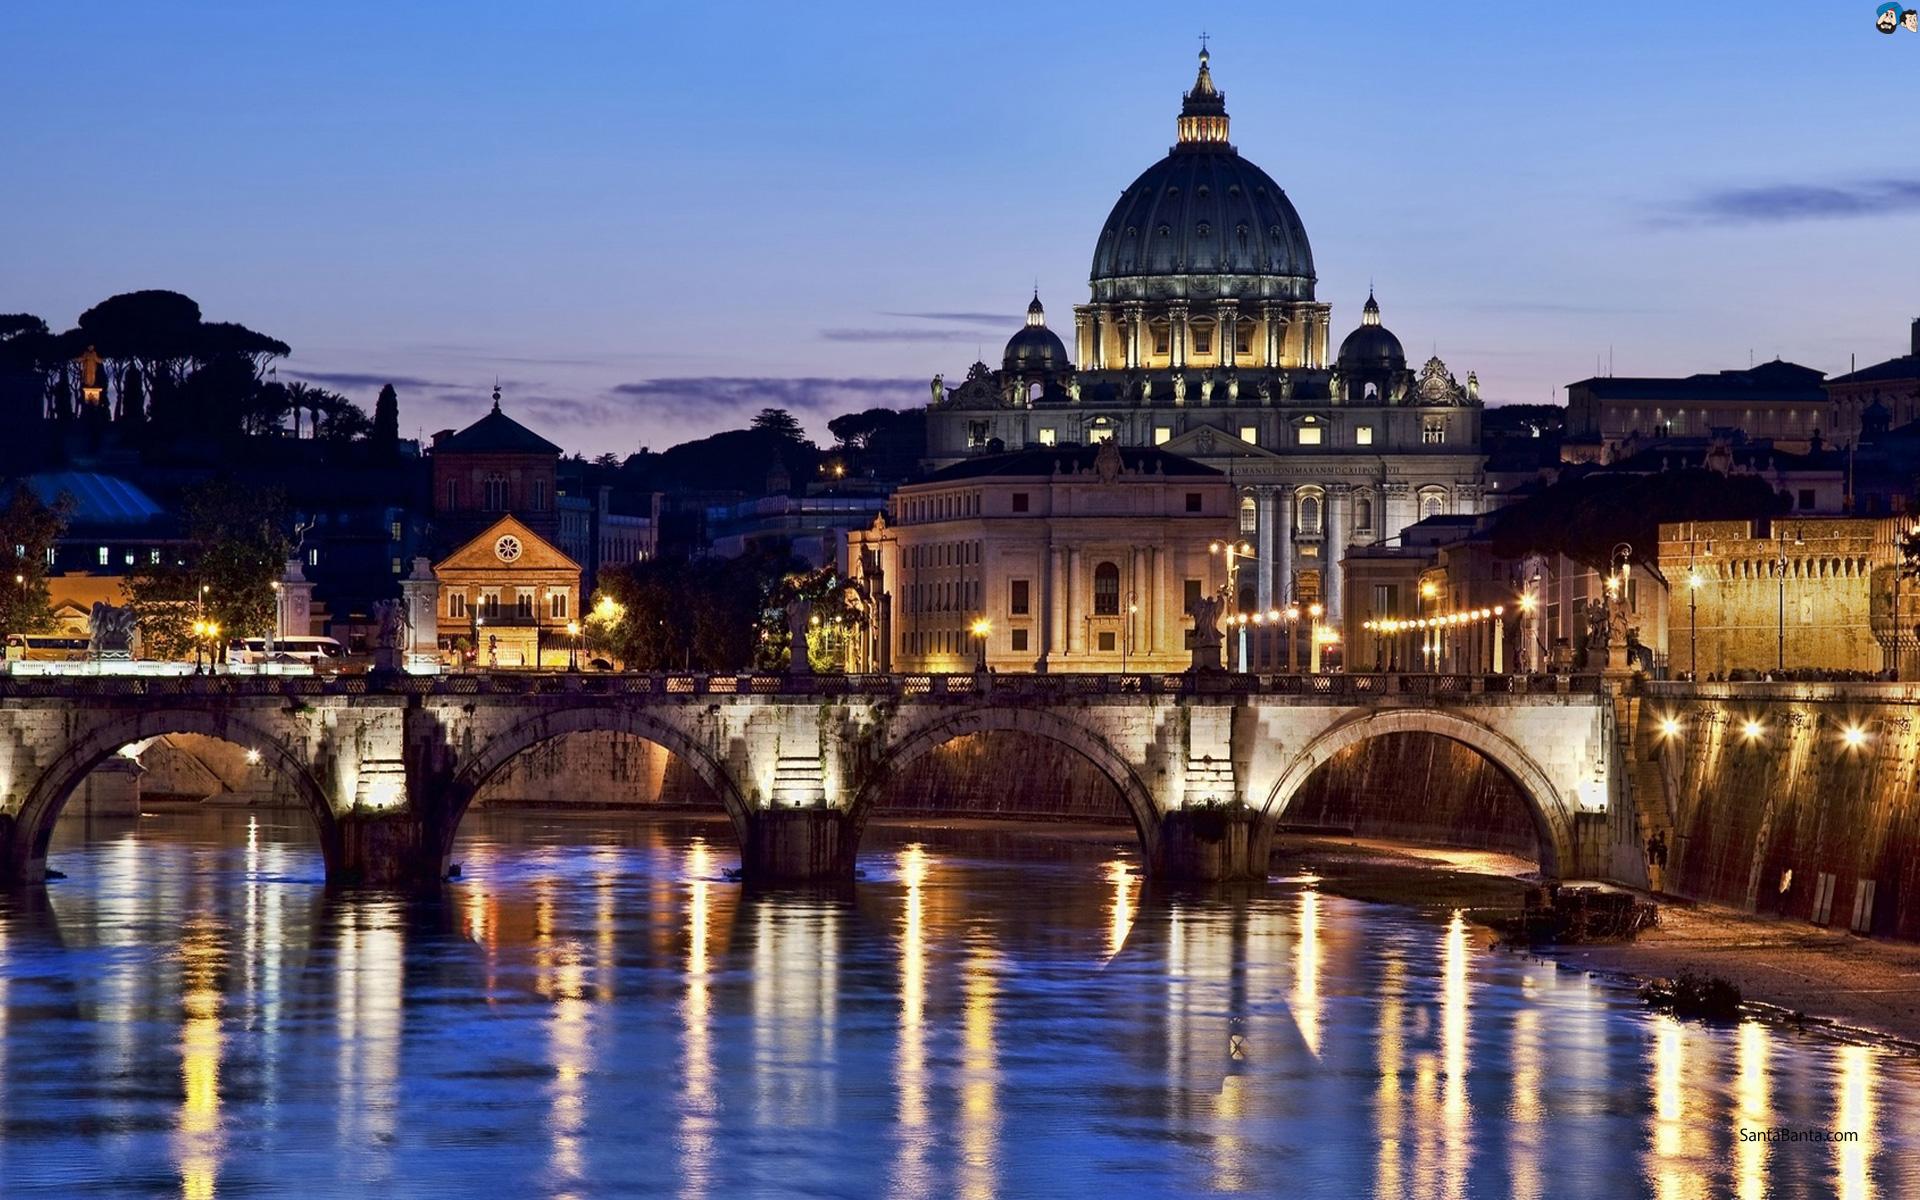 St. Peter`s Basilica in Rome, Italy